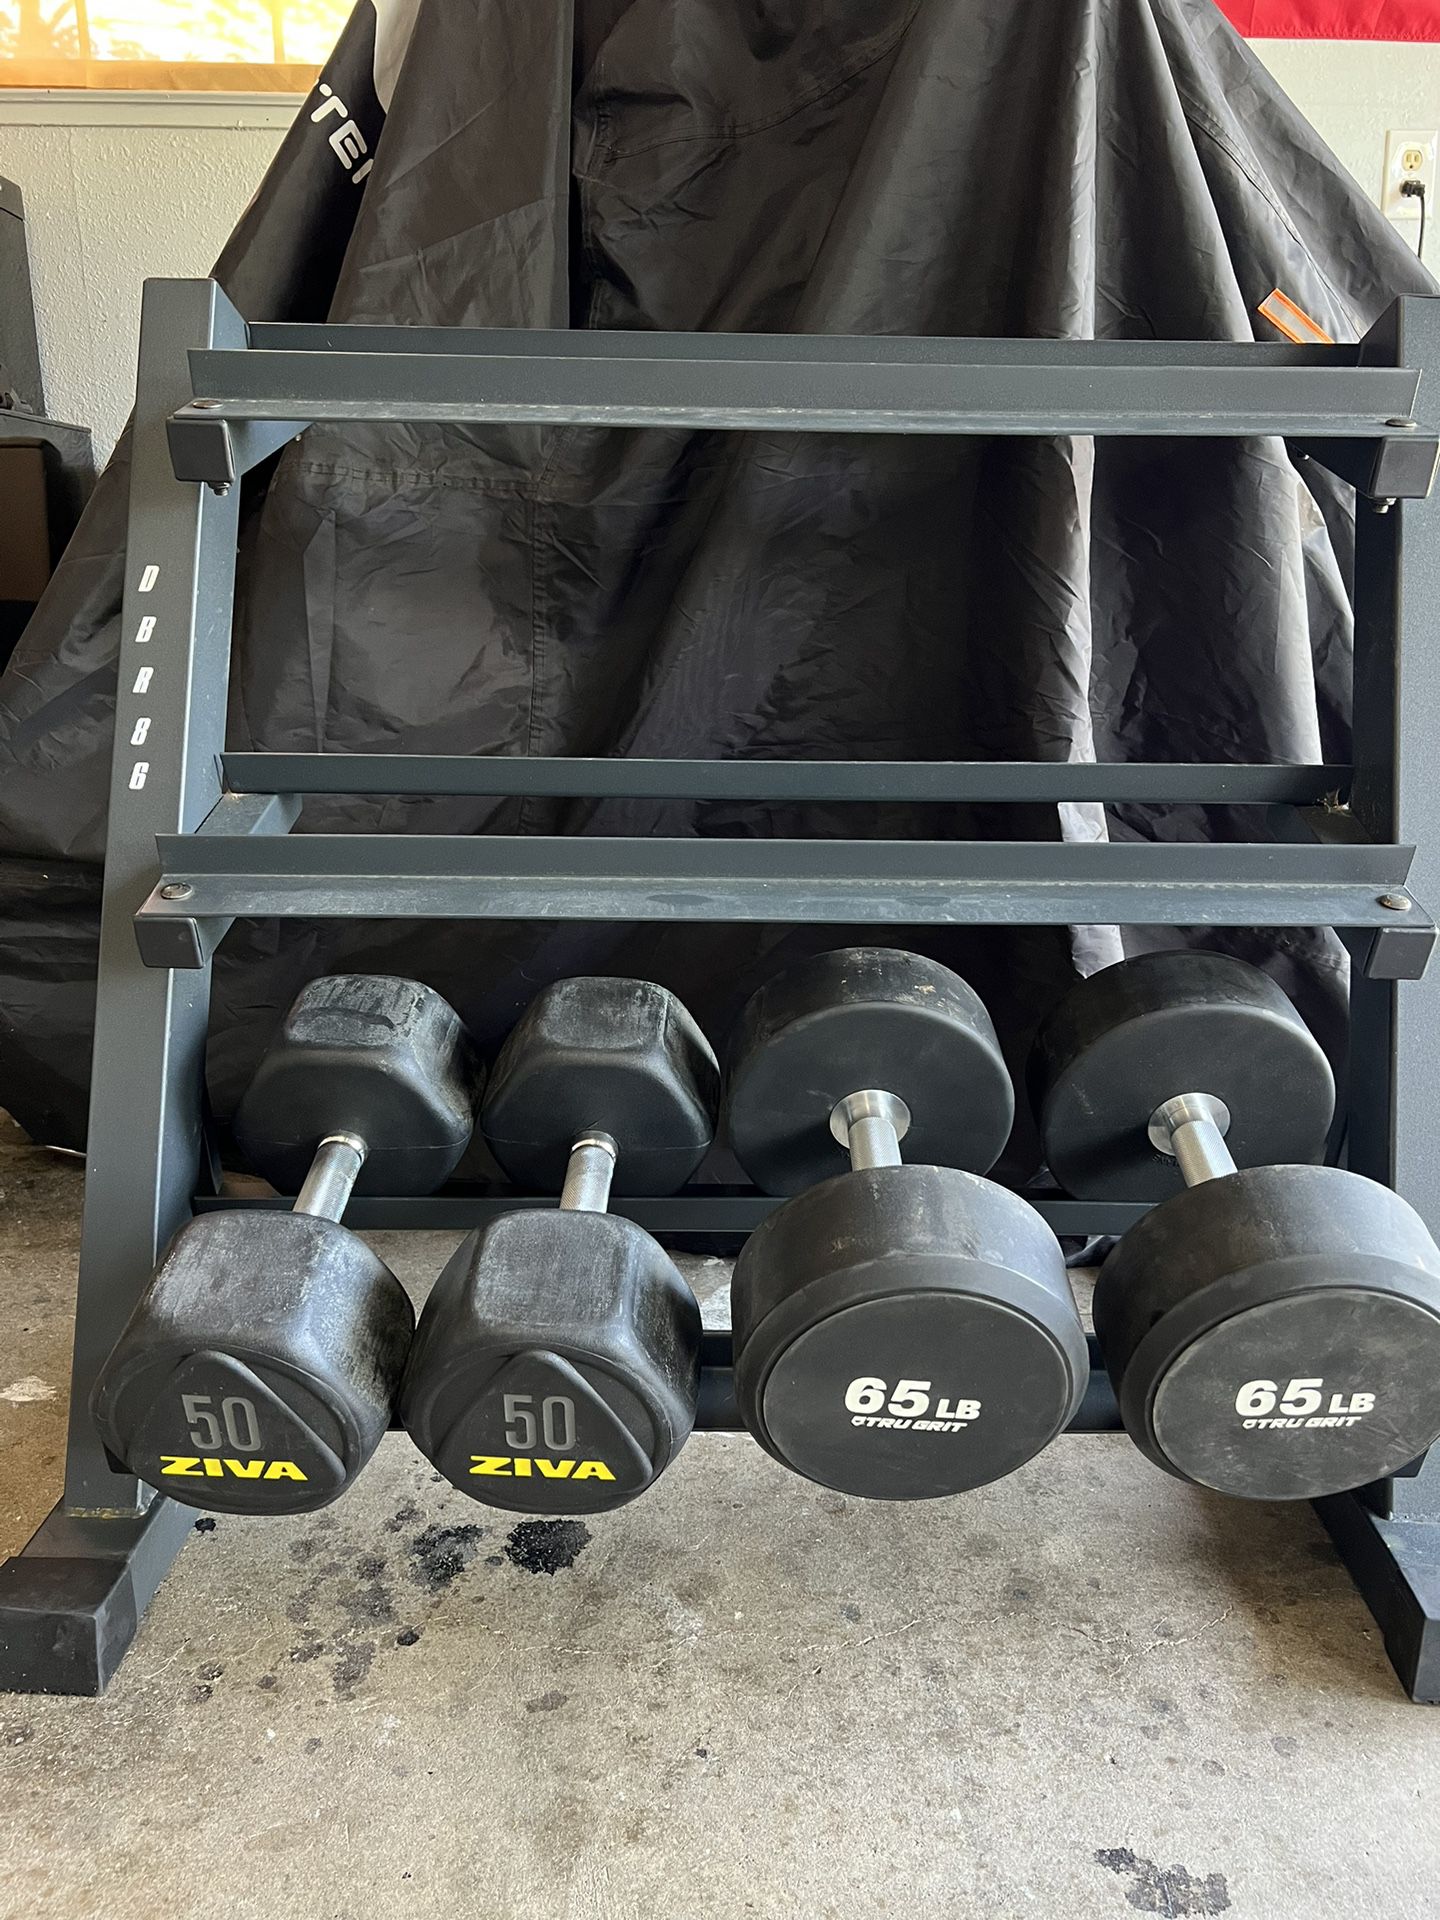 Dumbbell weights and rack